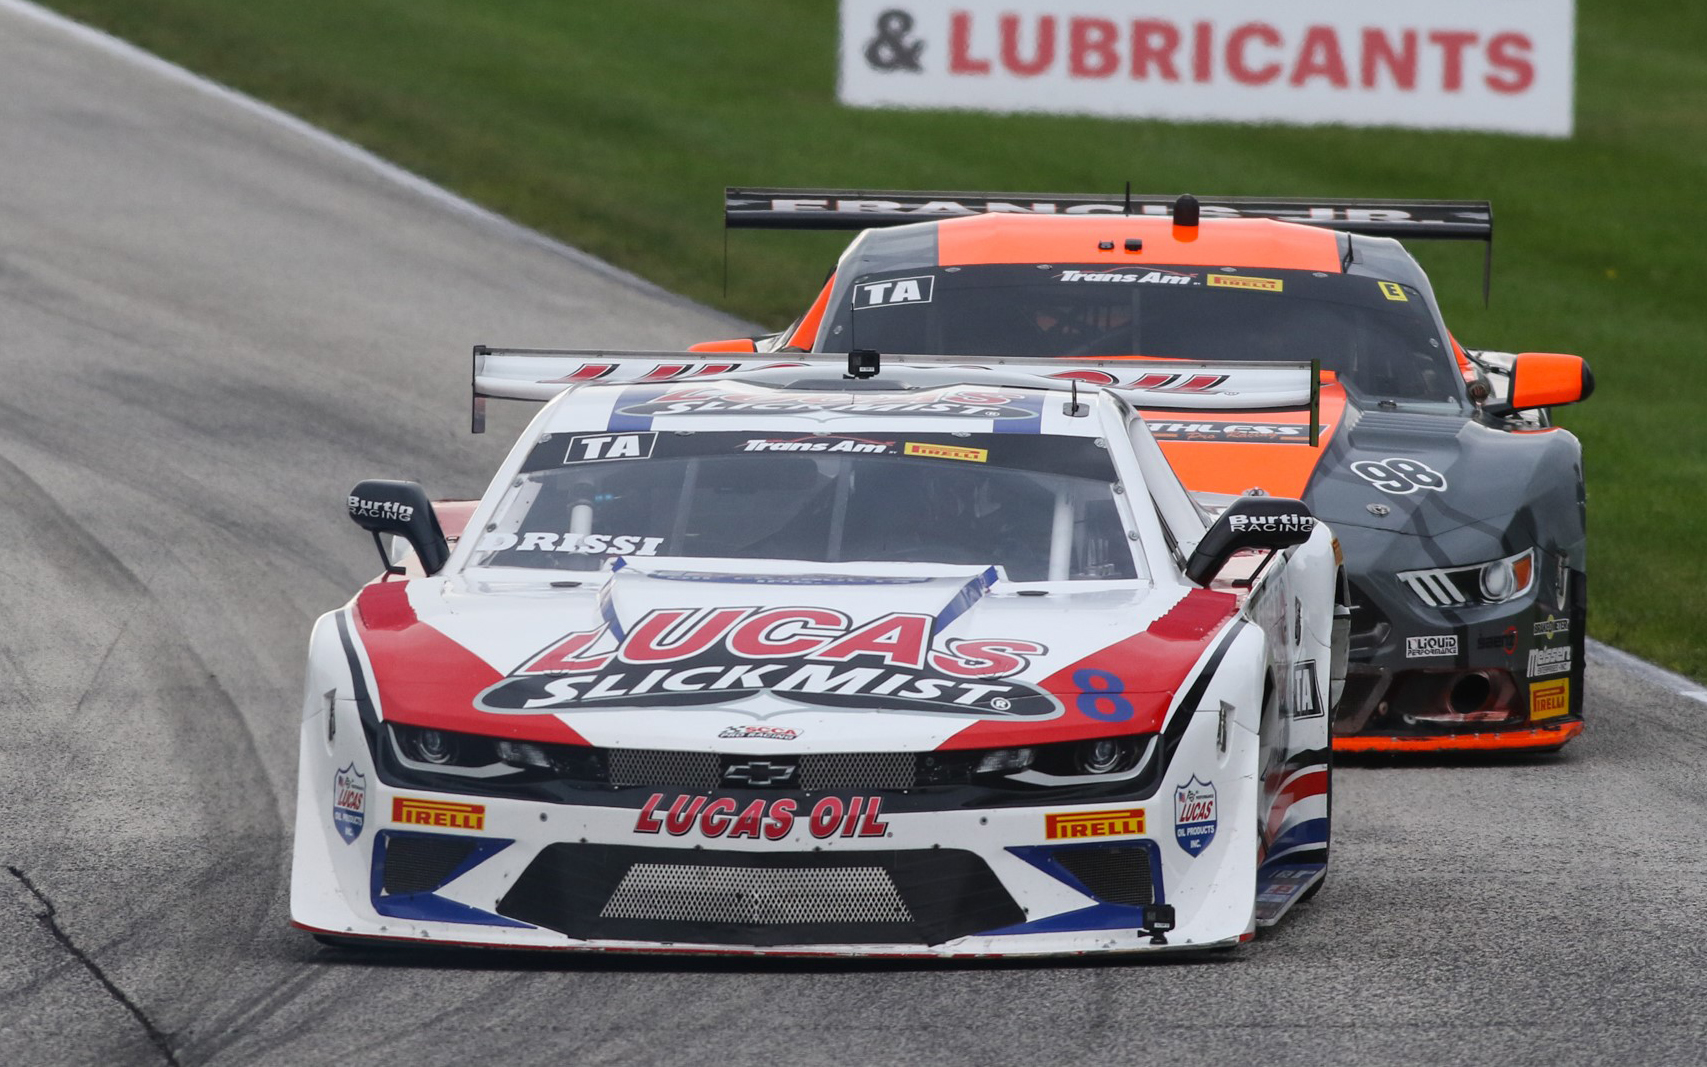 Show Stopper Tomy Drissi Does Not Let Last Lap Drama Get in the Way at Road America